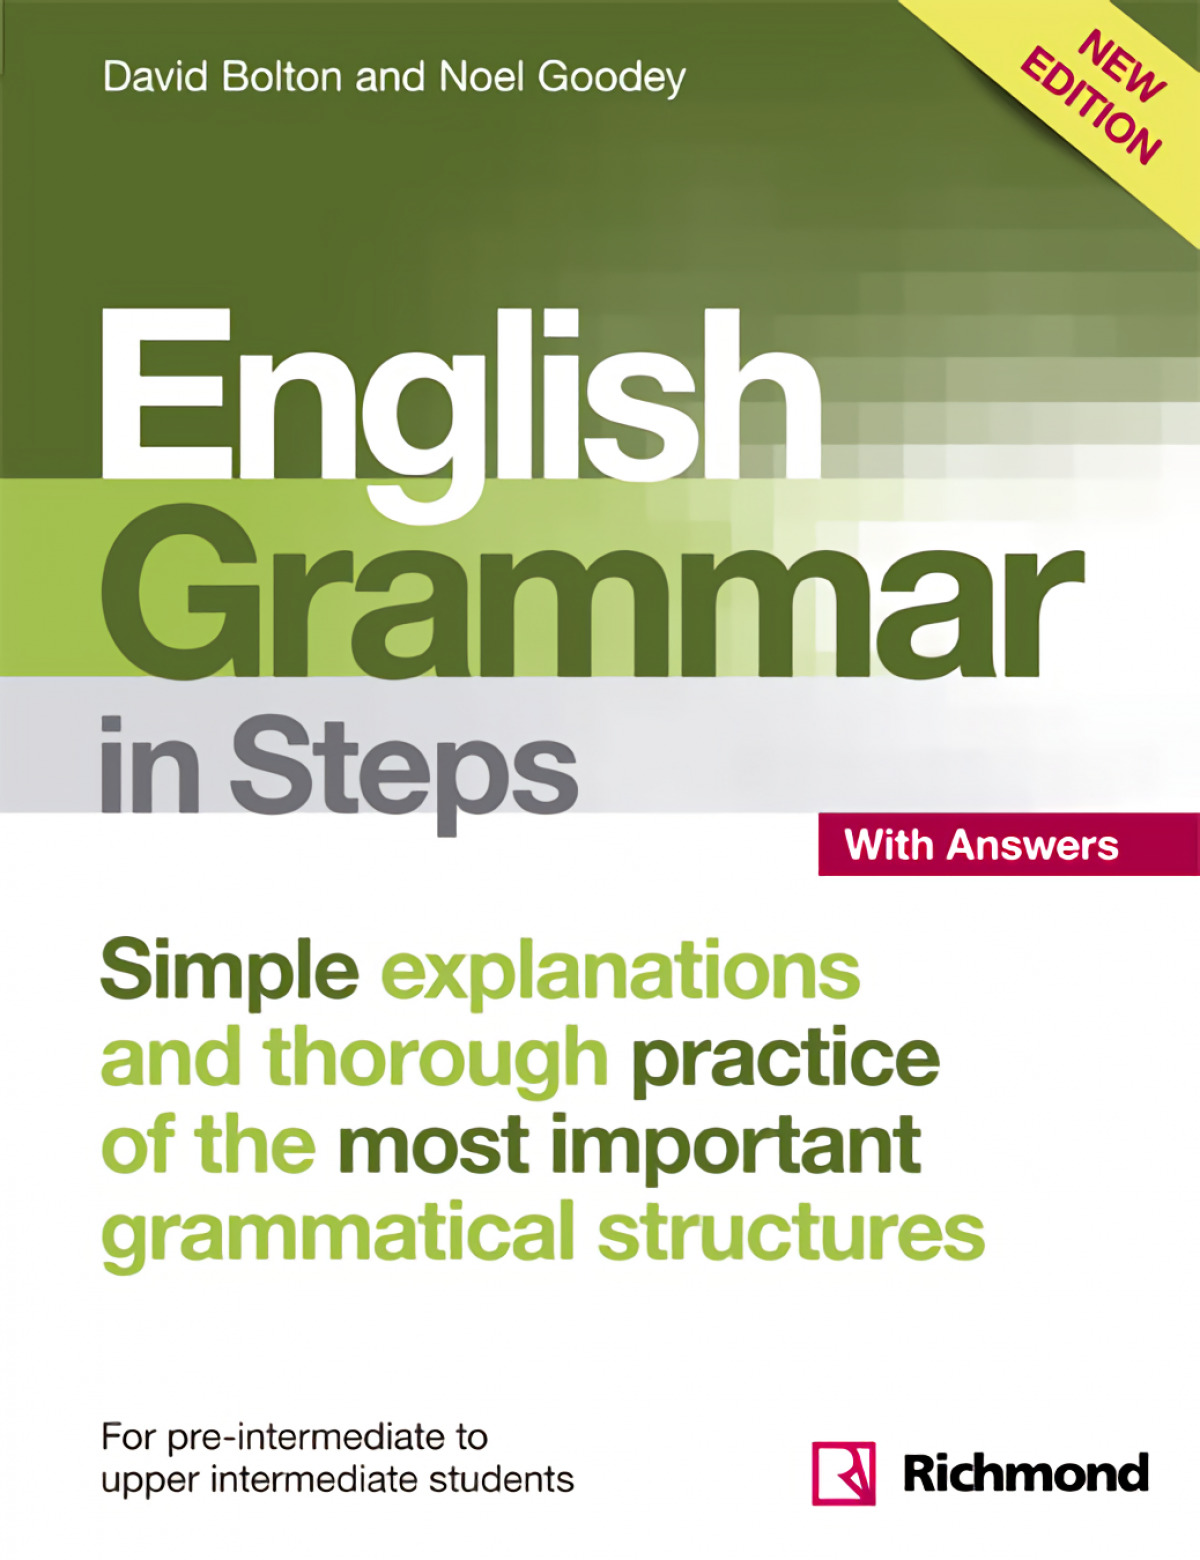 New english grammar in steps book with answers - Bolton, David